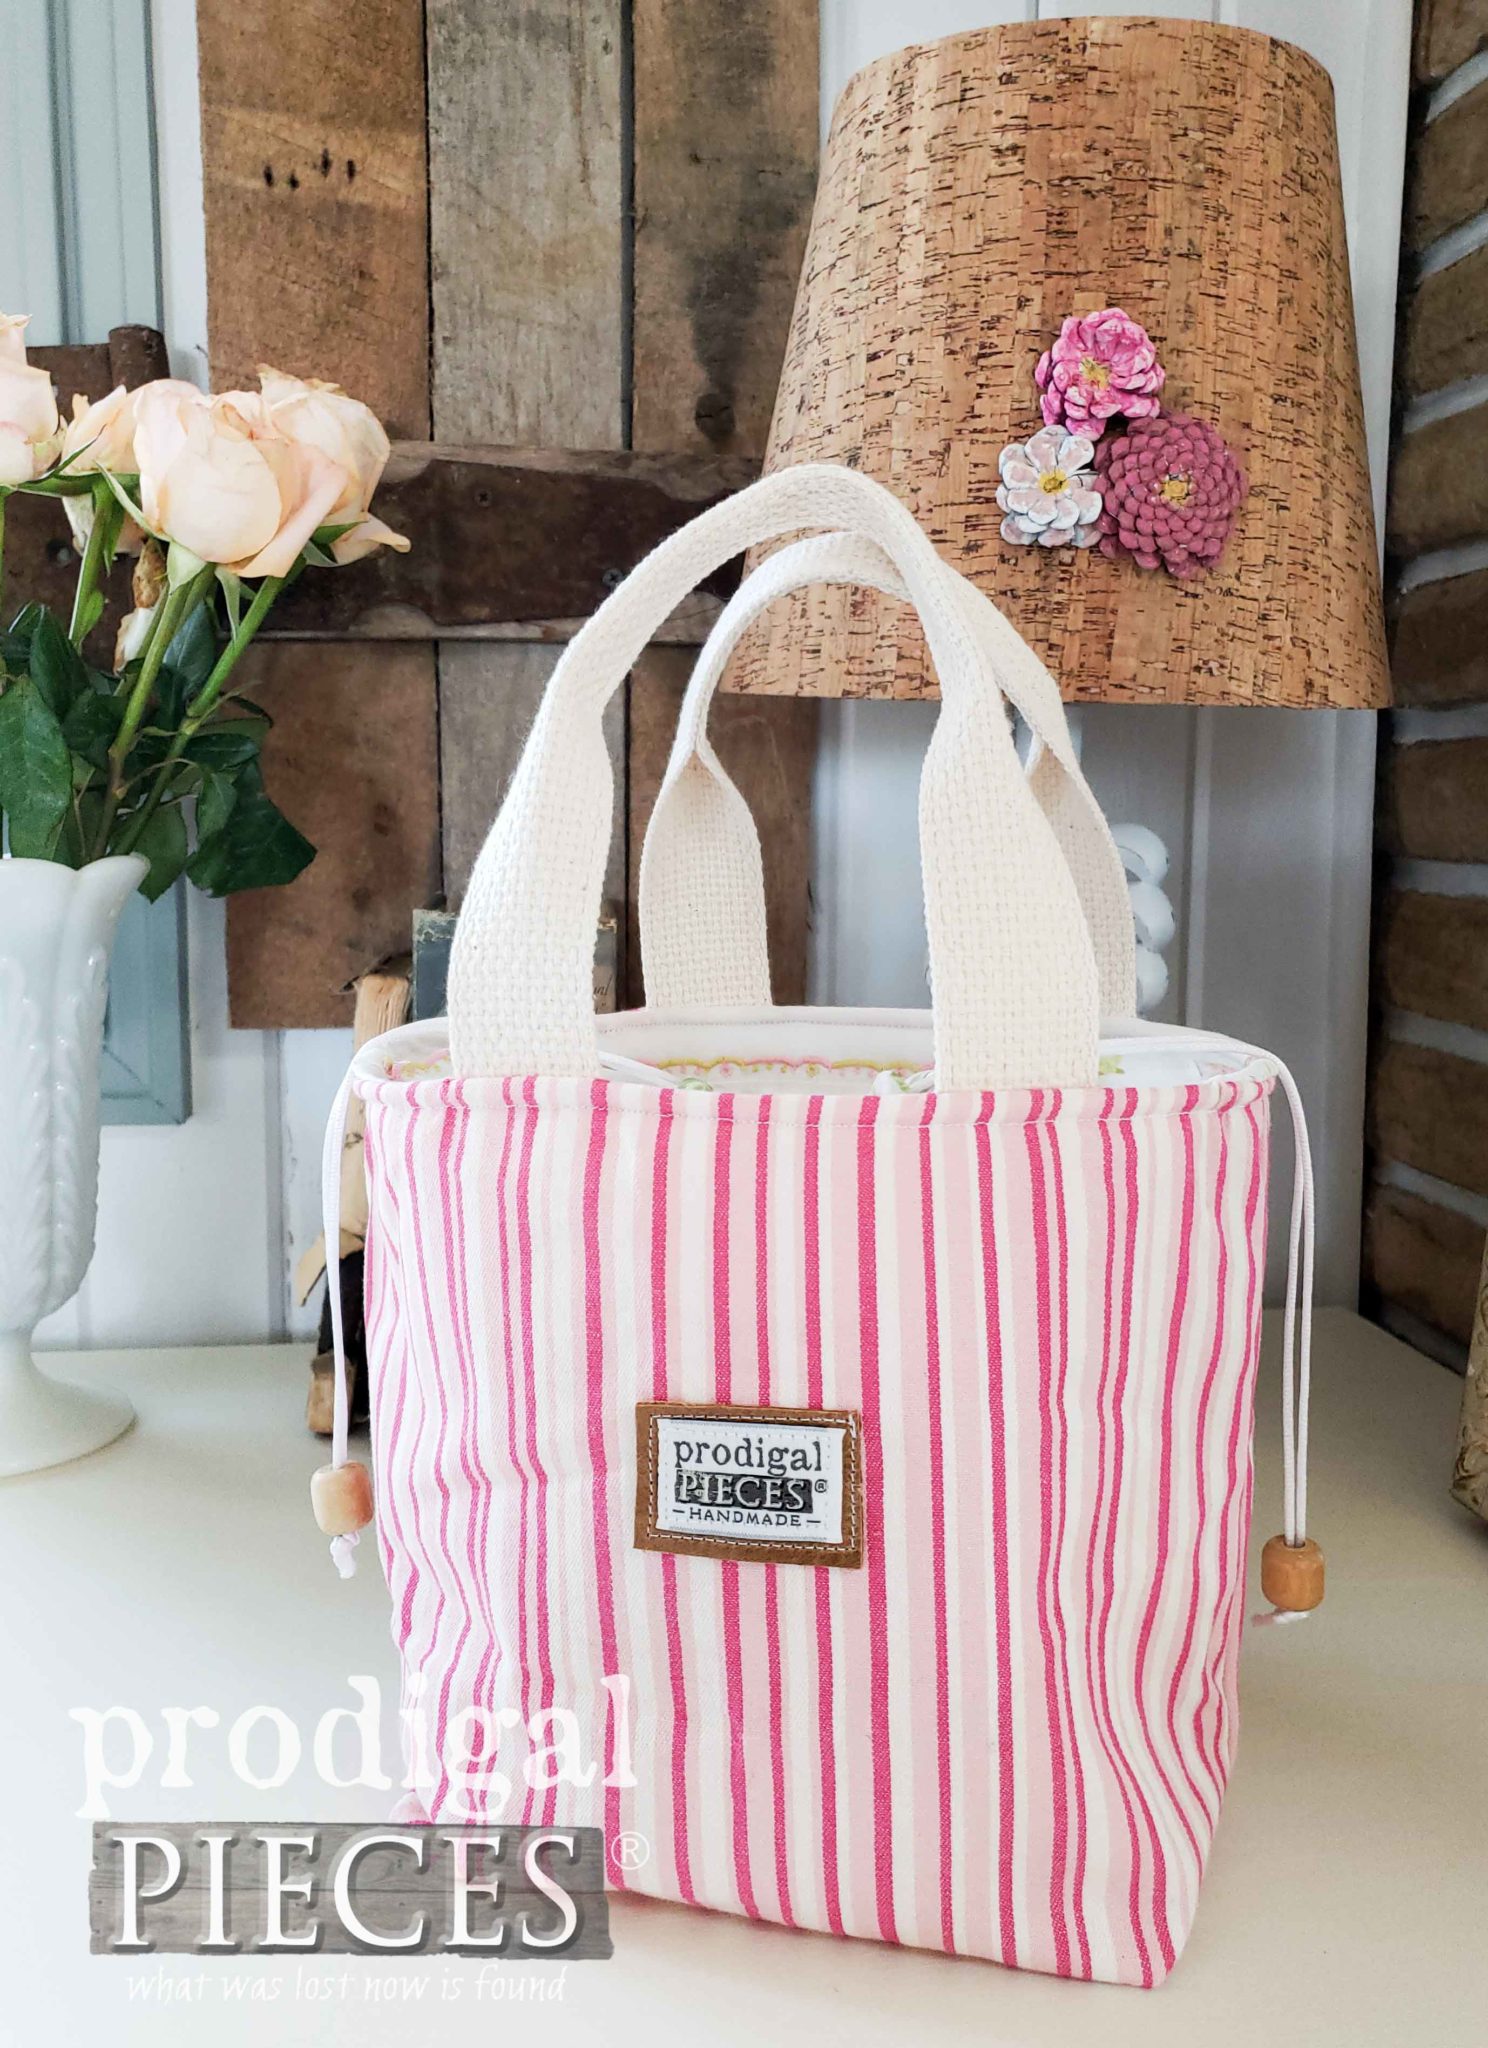 Pink Stripe with Rose Insulated Lunch Bag Tote by Larissa of Prodigal Pieces | Purchase yours at shop.prodigalpieces.com #prodigalpieces #fashion #accessories #handmade #shopping